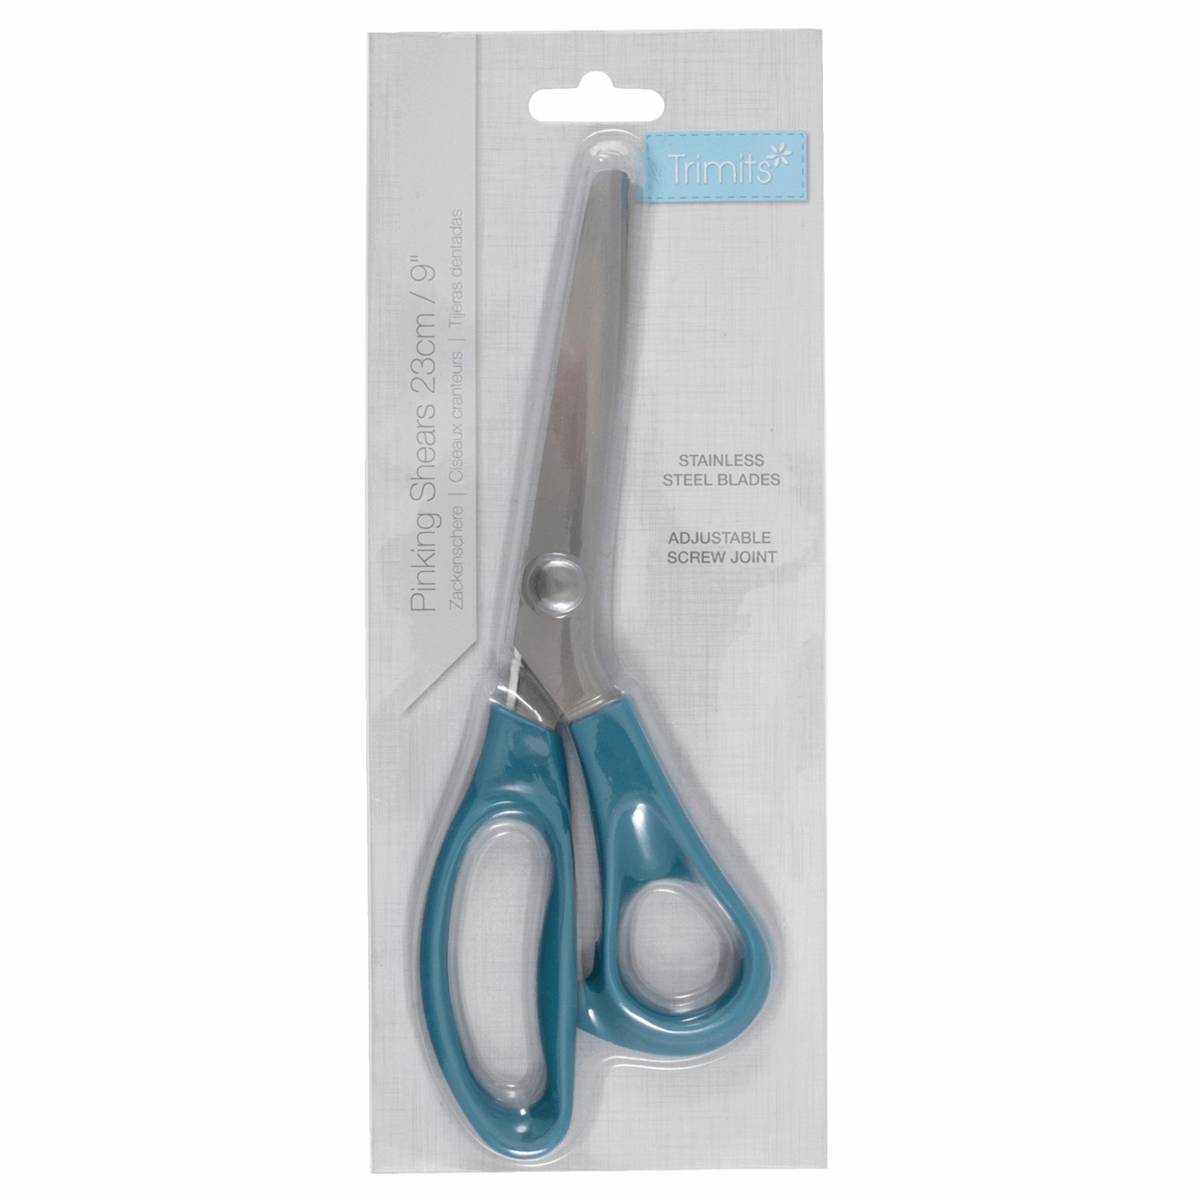 Trimits Pinking shears 23cm/9in